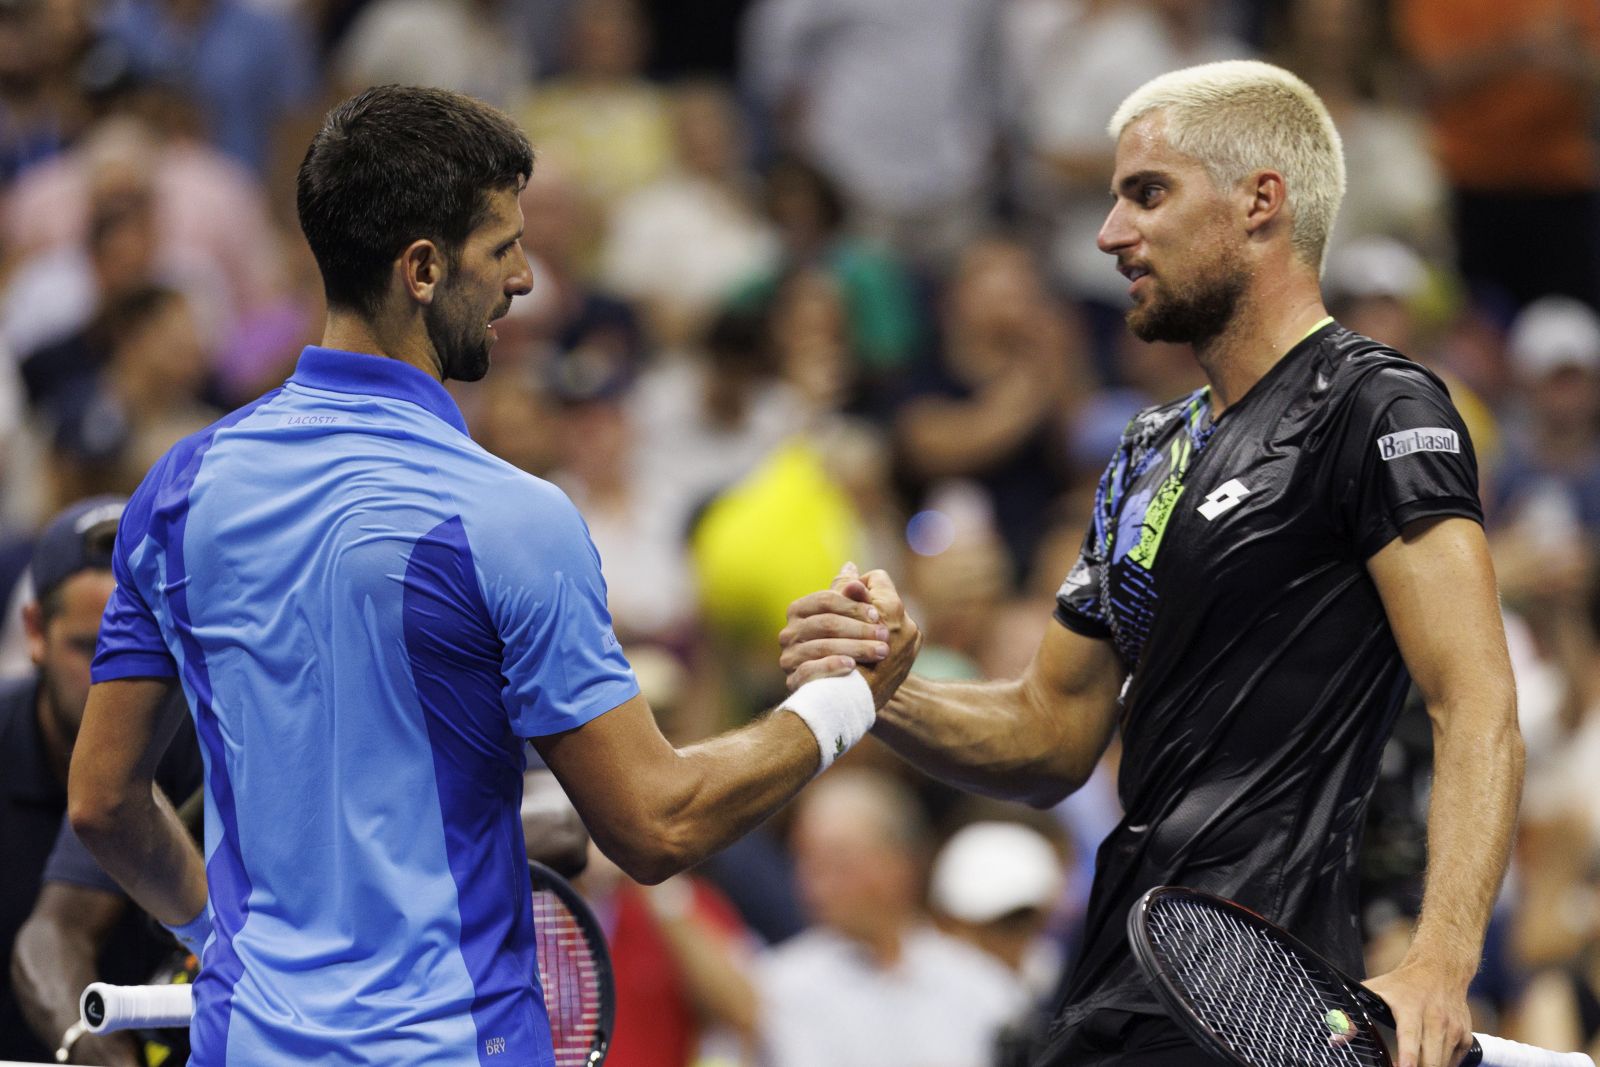 epa10839048 Novak Djokovic of Serbia (L) greets Borna Gojo of Croatia (R) at the net after Djokovic defeated Gojo in their fourth round match at the US Open Tennis Championships at the USTA National Tennis Center in Flushing Meadows, New York, USA, 03 September 2023. The US Open runs from 28 August through 10 September.  EPA/CJ GUNTHER